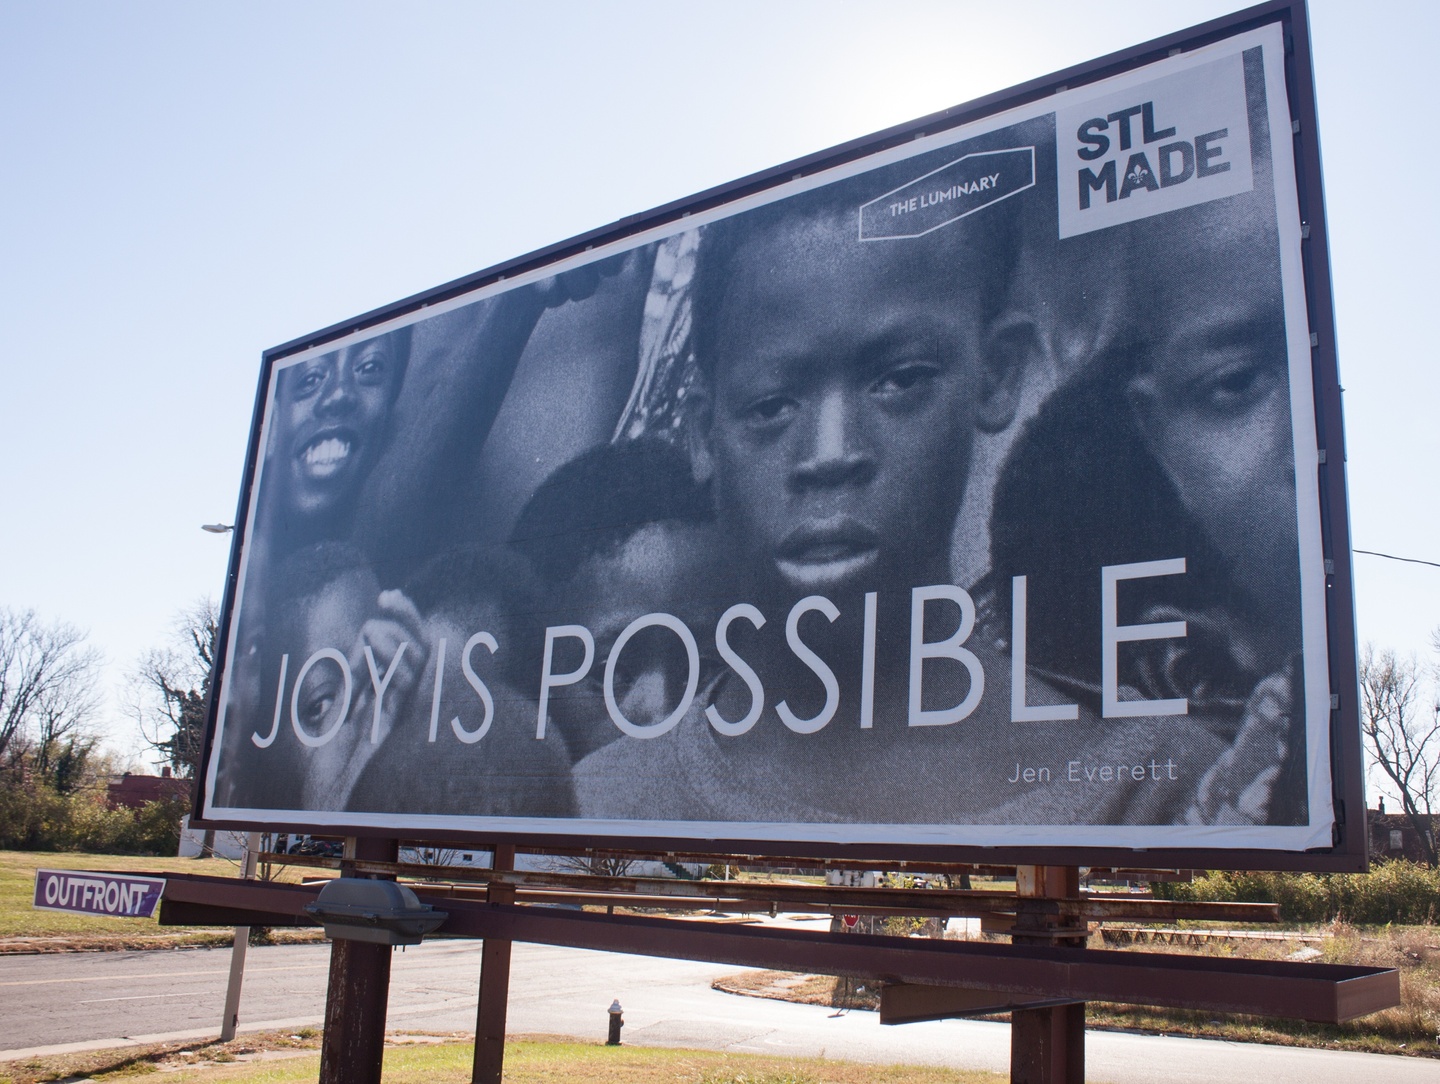 Black and white image of children with text joy is possible on billboard